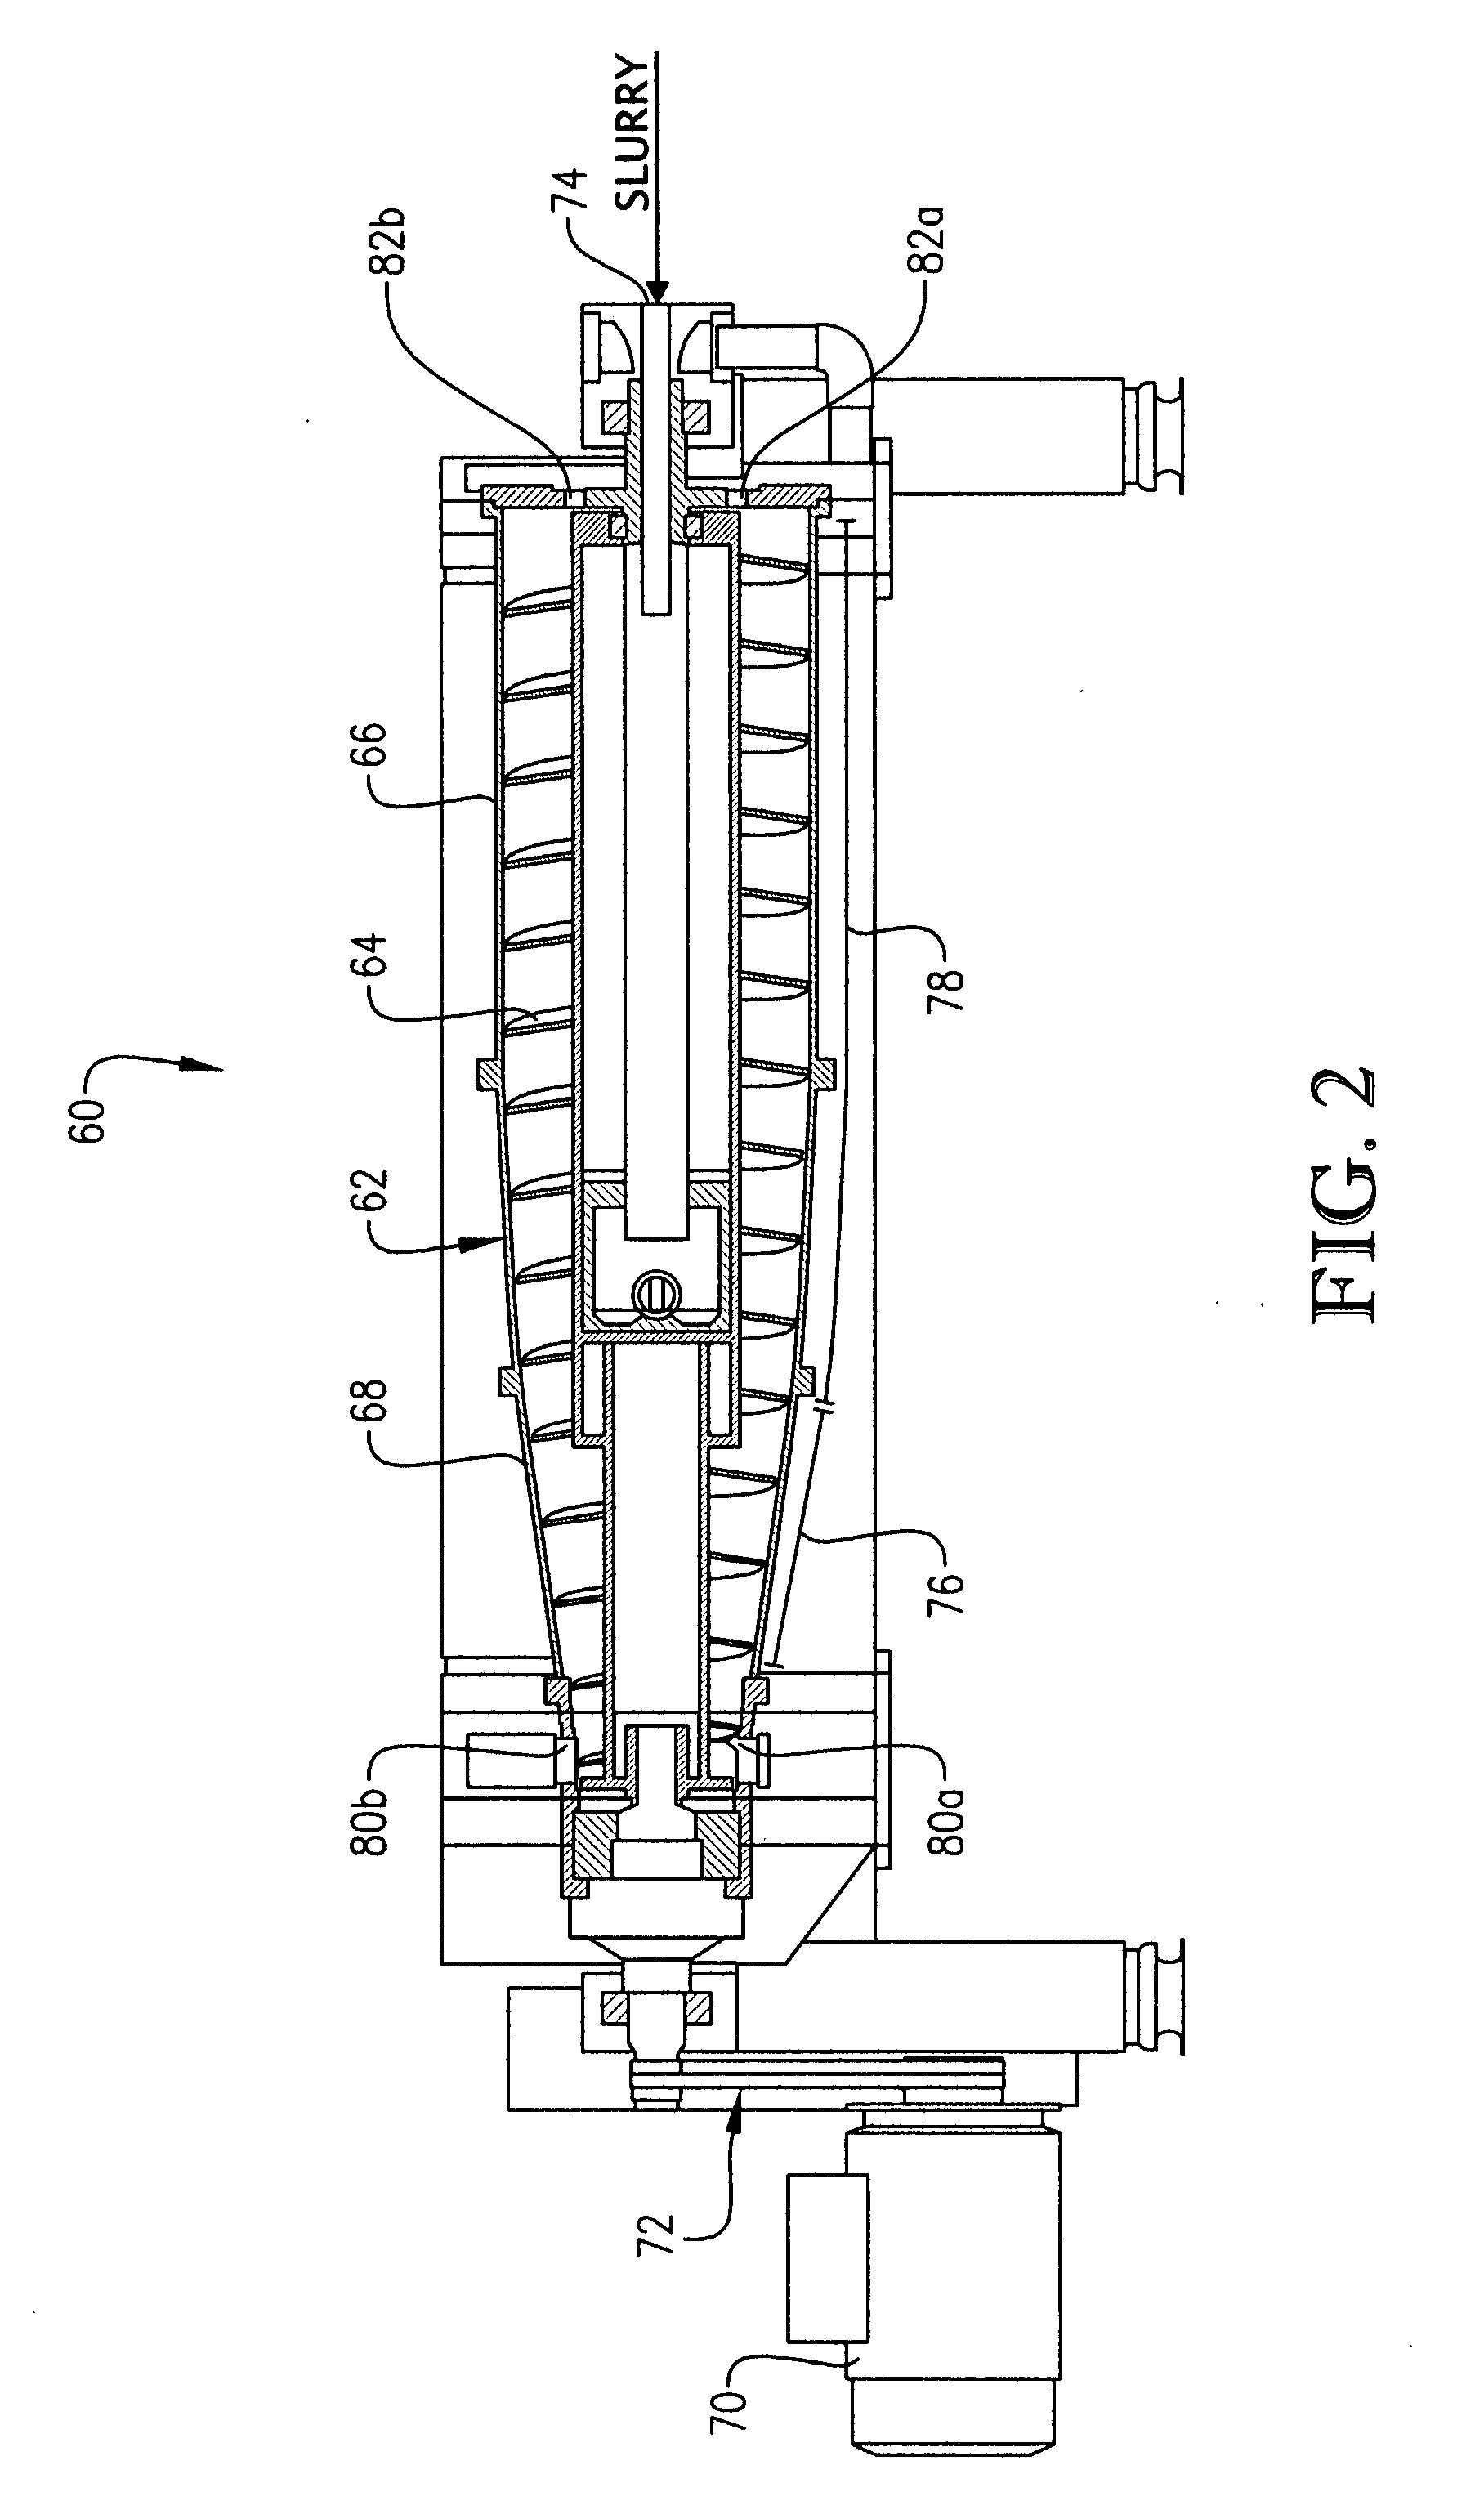 Methods and apparatus for isolating carboxylic acid